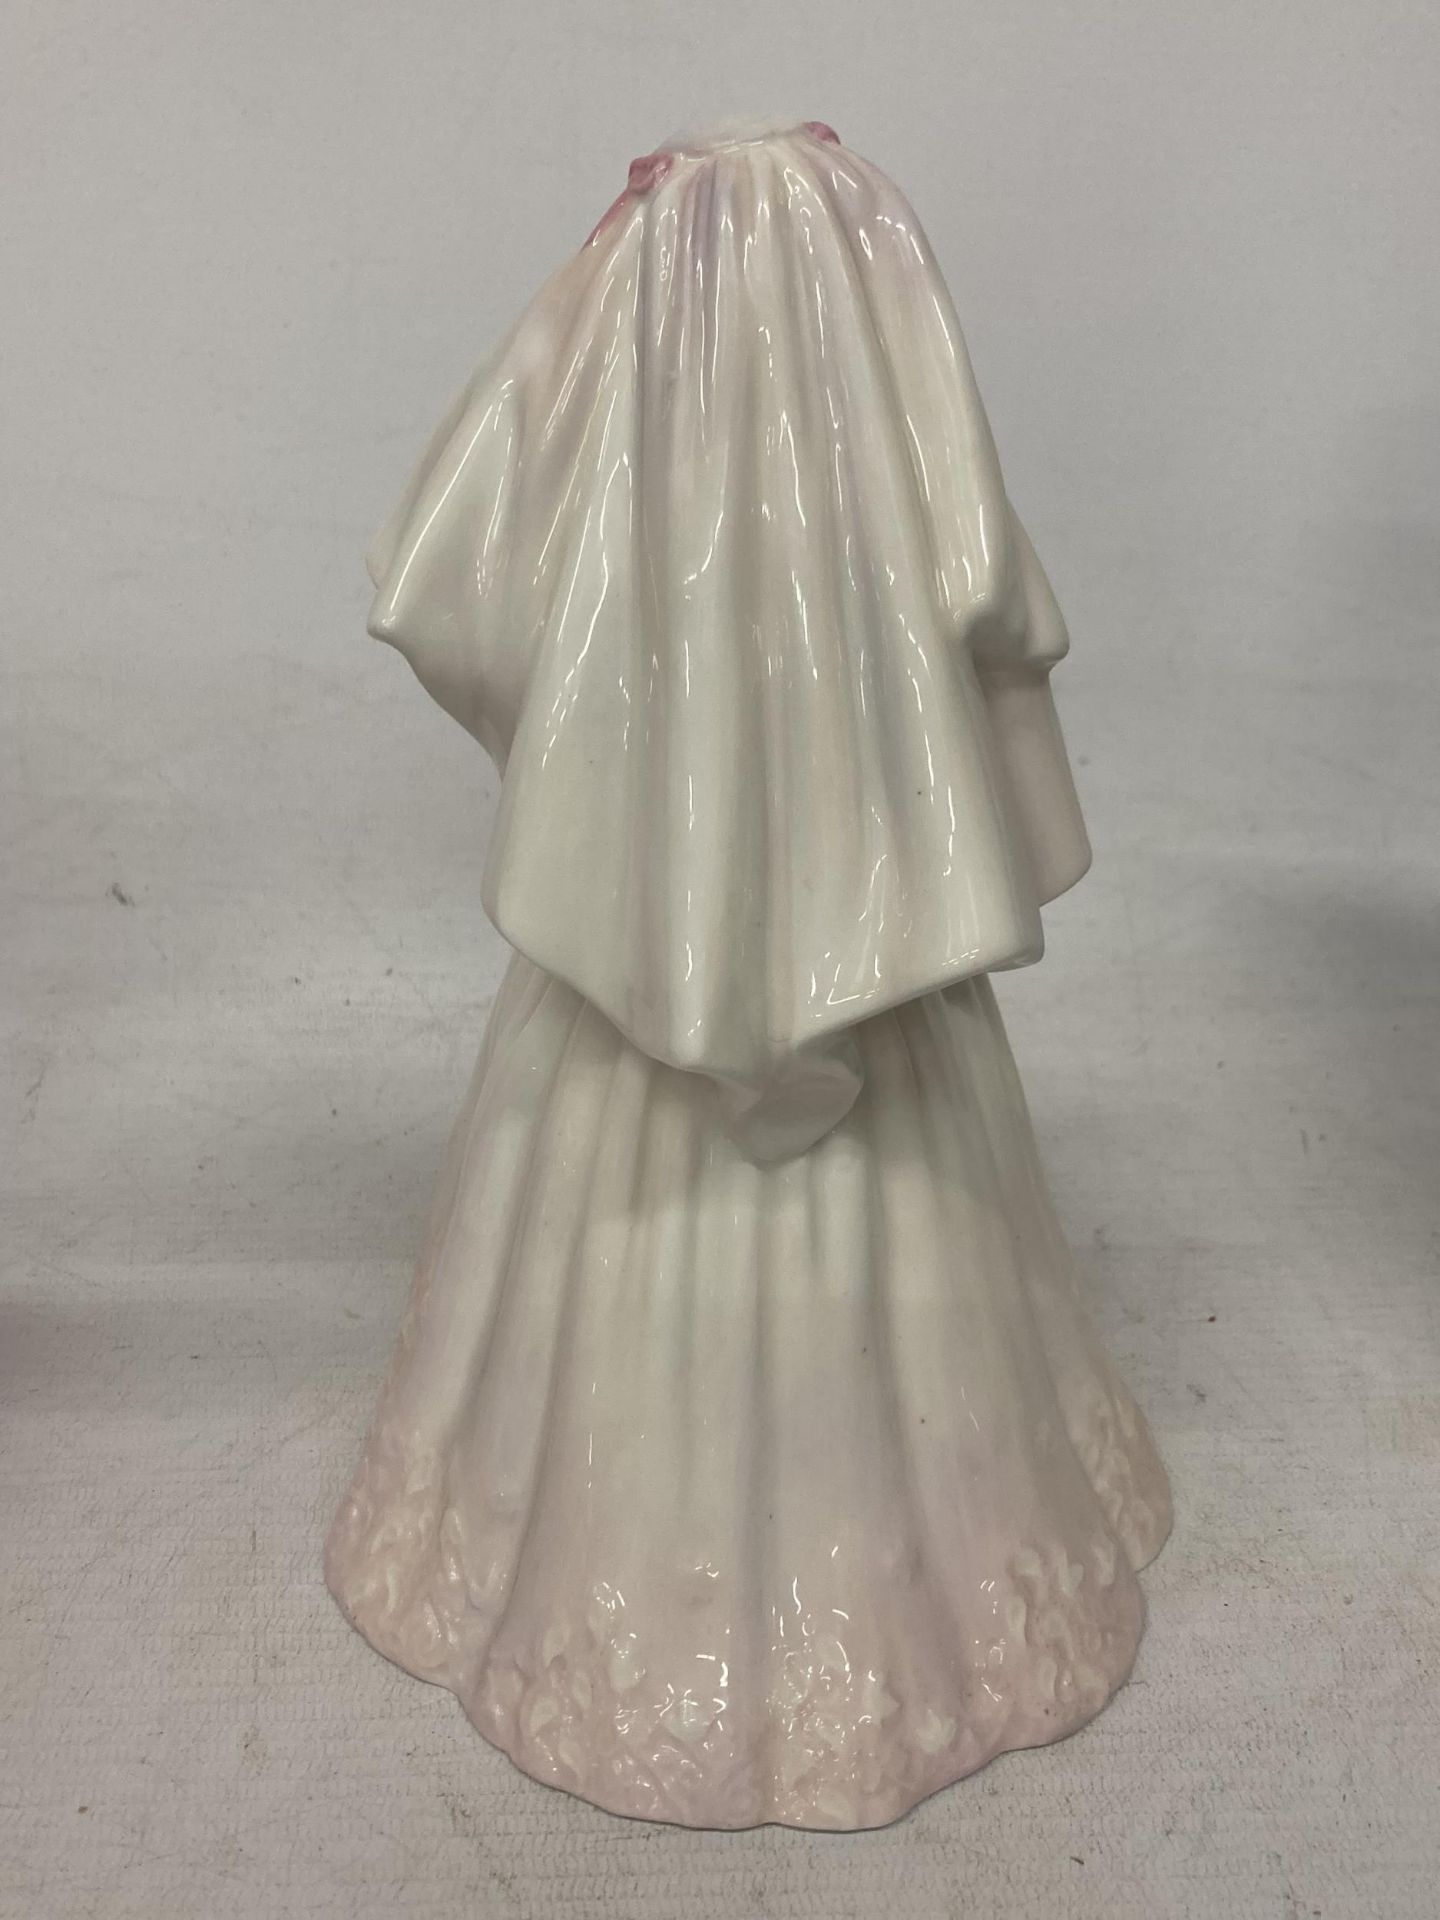 A ROYAL DOULTON FIGURINE "THE BRIDE" HN 2166 - Image 3 of 4